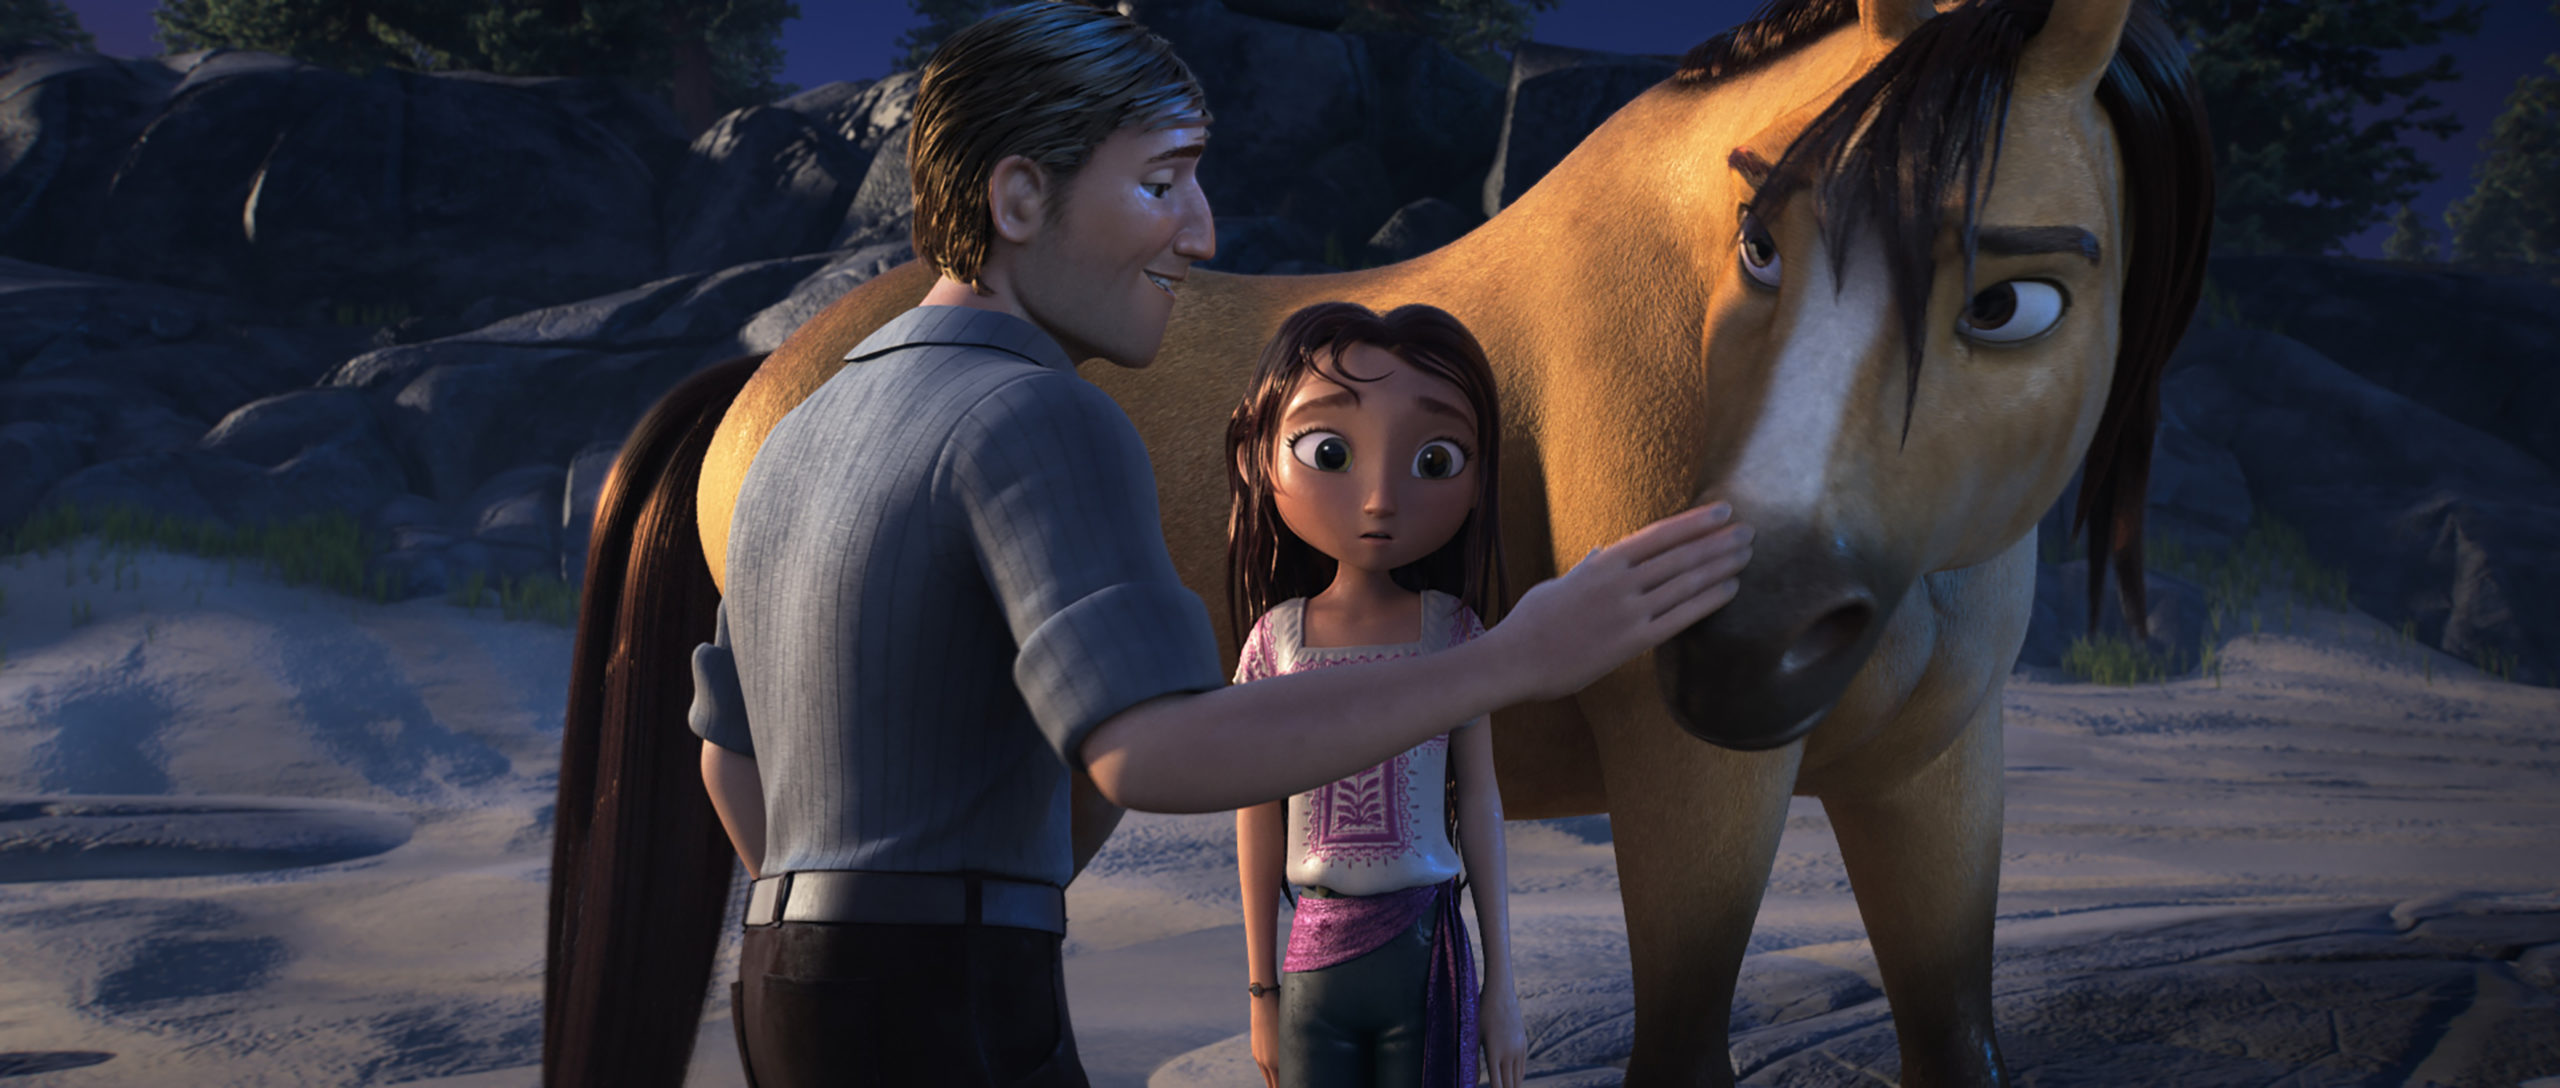 Spirit Untamed Trailer Shows The Bond With A Girl and A Wild Horse